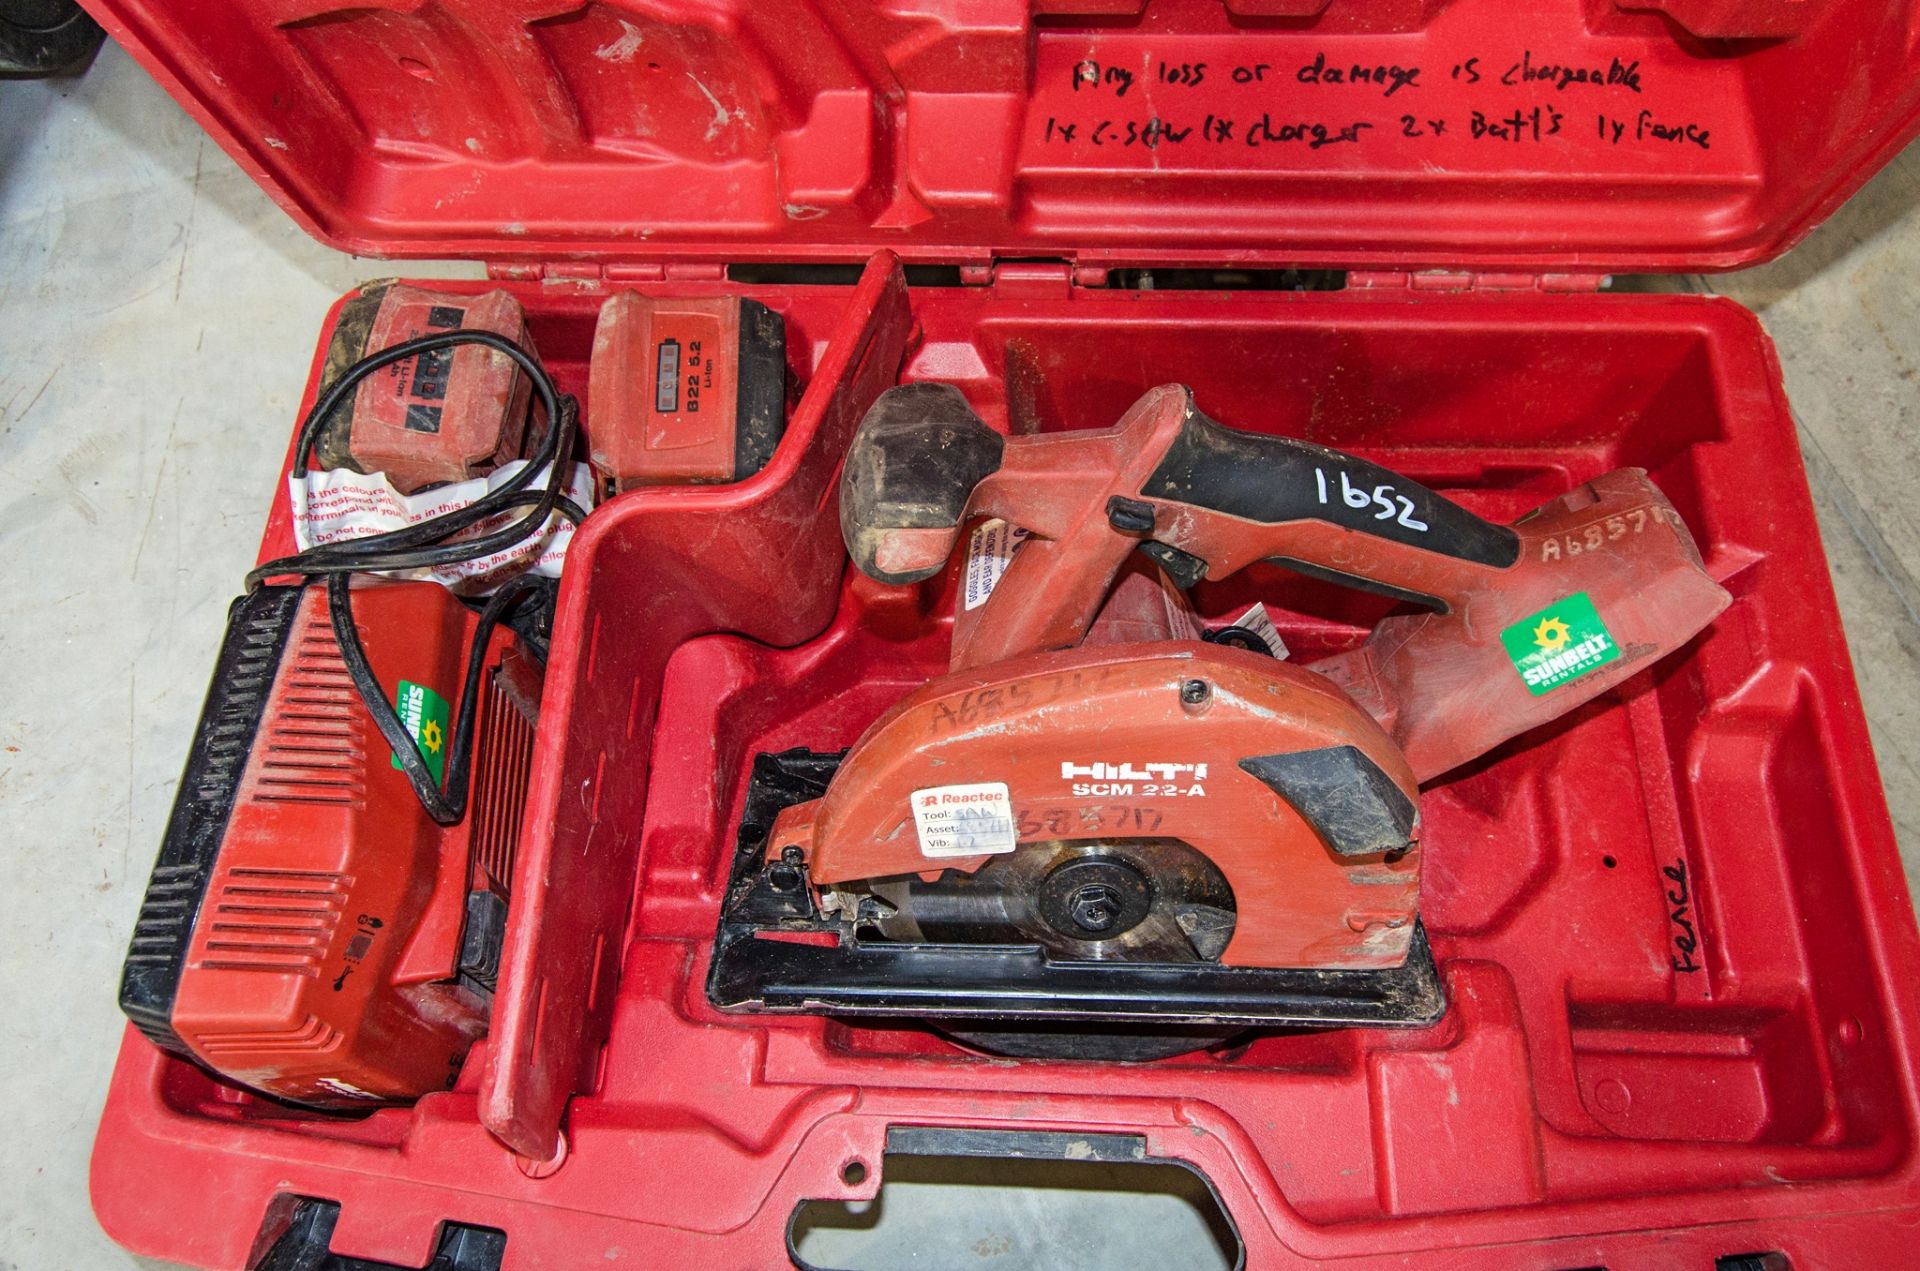 Hilti SCM22-A 22v cordless circular saw c/w 2 - batteries, charger and carry case A685717